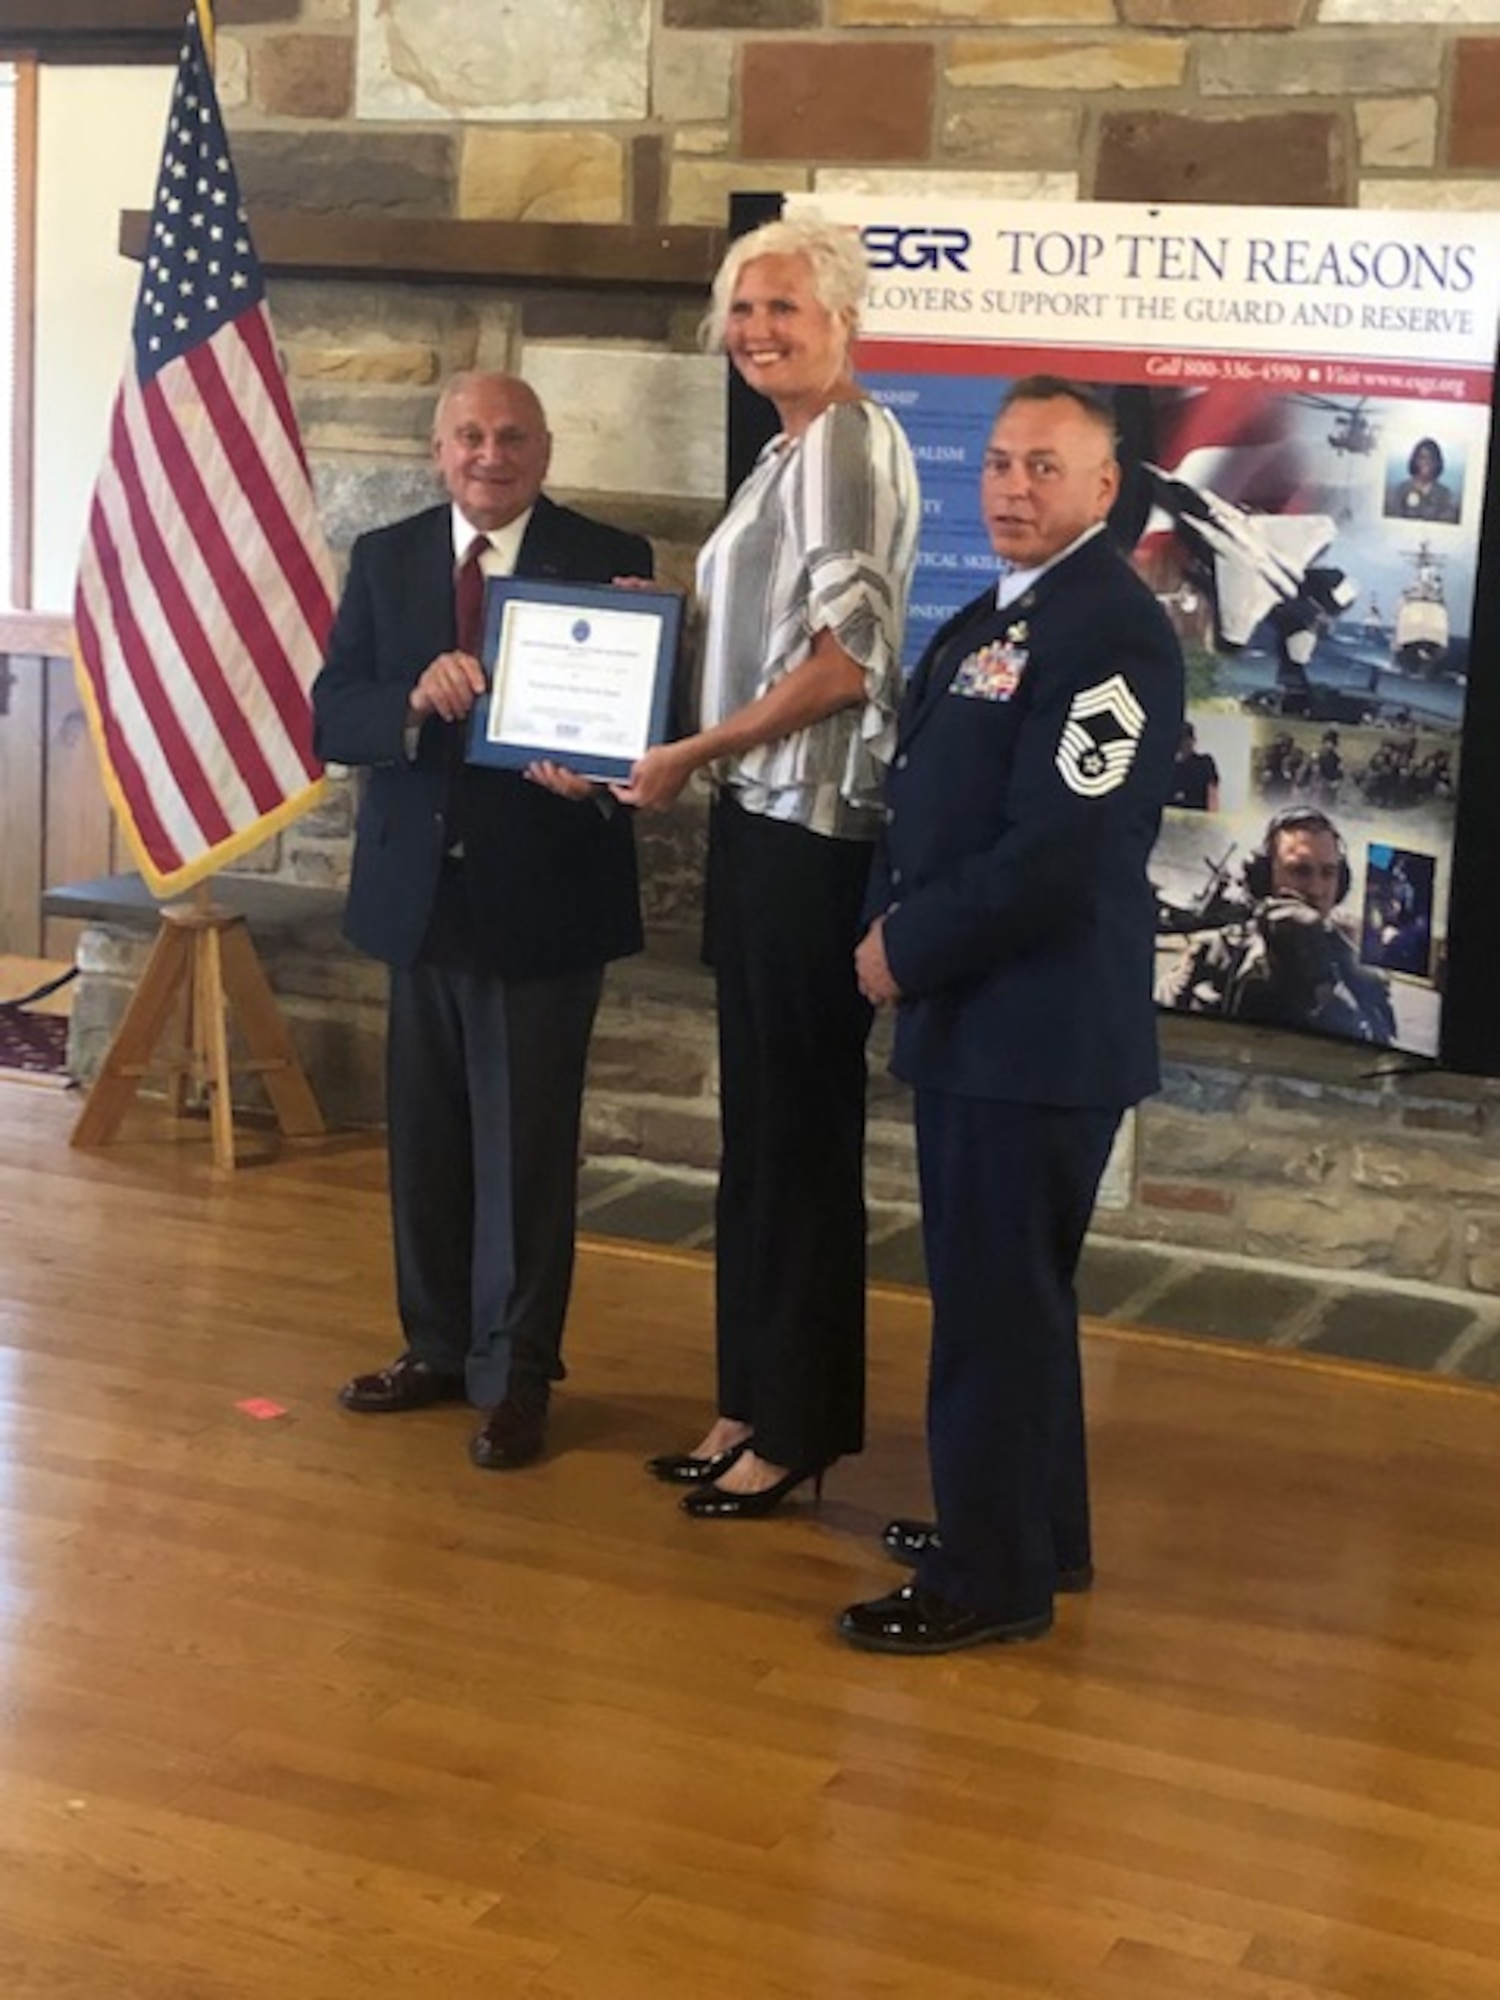 Martin Kuhar (left), Pennsylvania Employer Support of the Guard and Reserve state chair, presents a Patriot Award to Amy Landfair (center), deputy district director of the Pennsylvania State Parole Board at the Keystone Conference Center, Fort Indiantown Gap, Pennsylvania, Aug. 12, 2021.